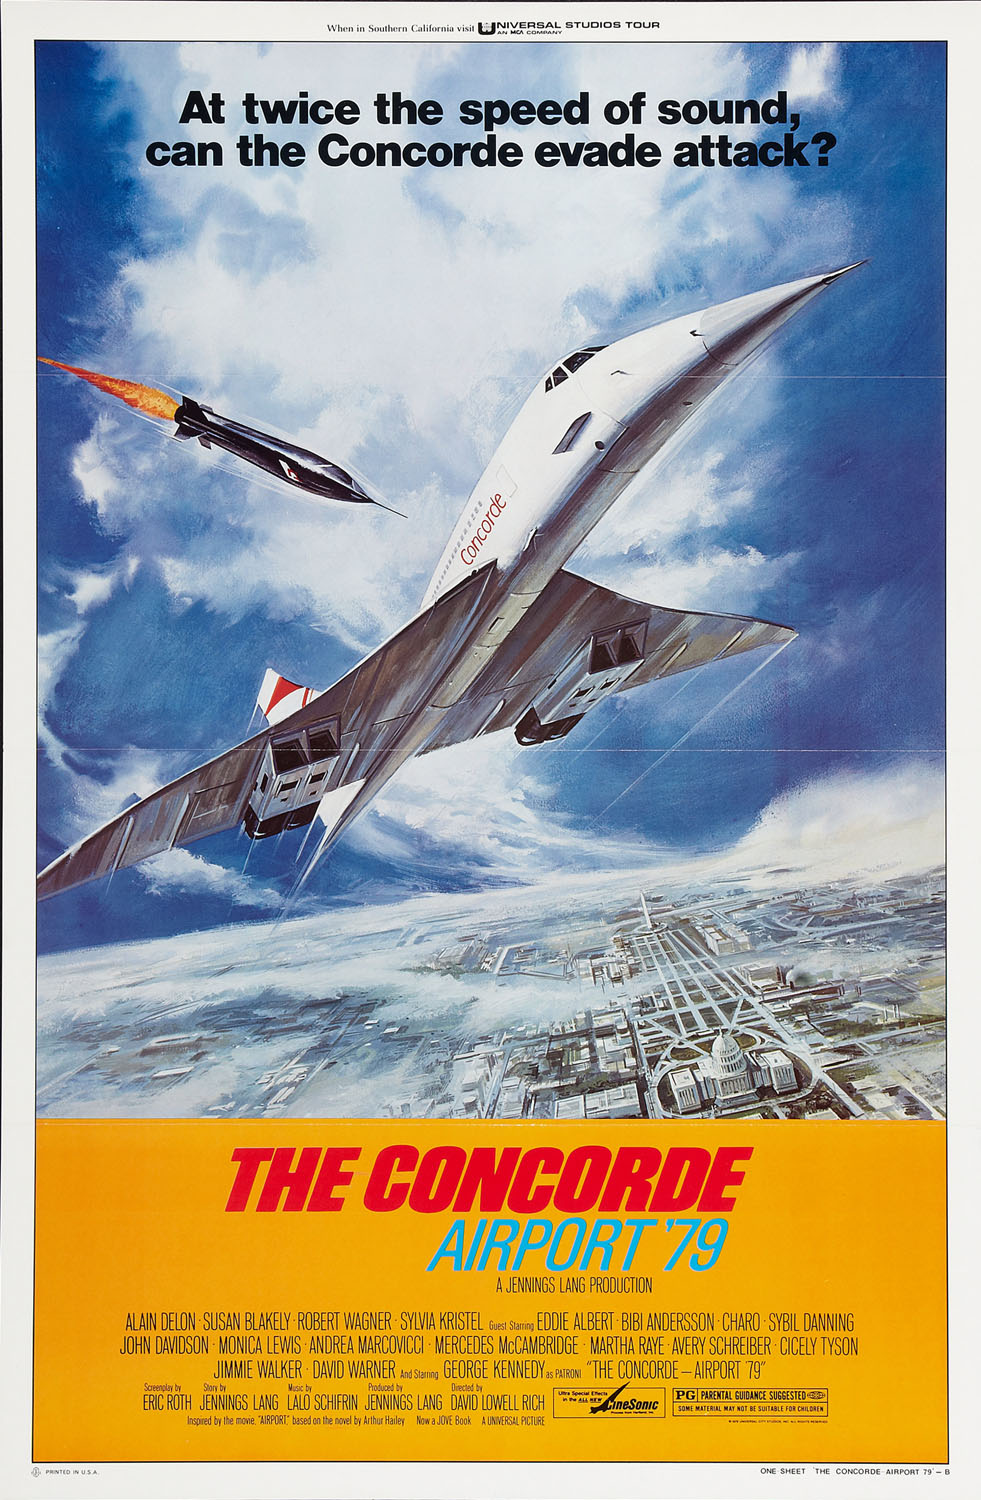 CONCORDE: AIRPORT \'79, THE